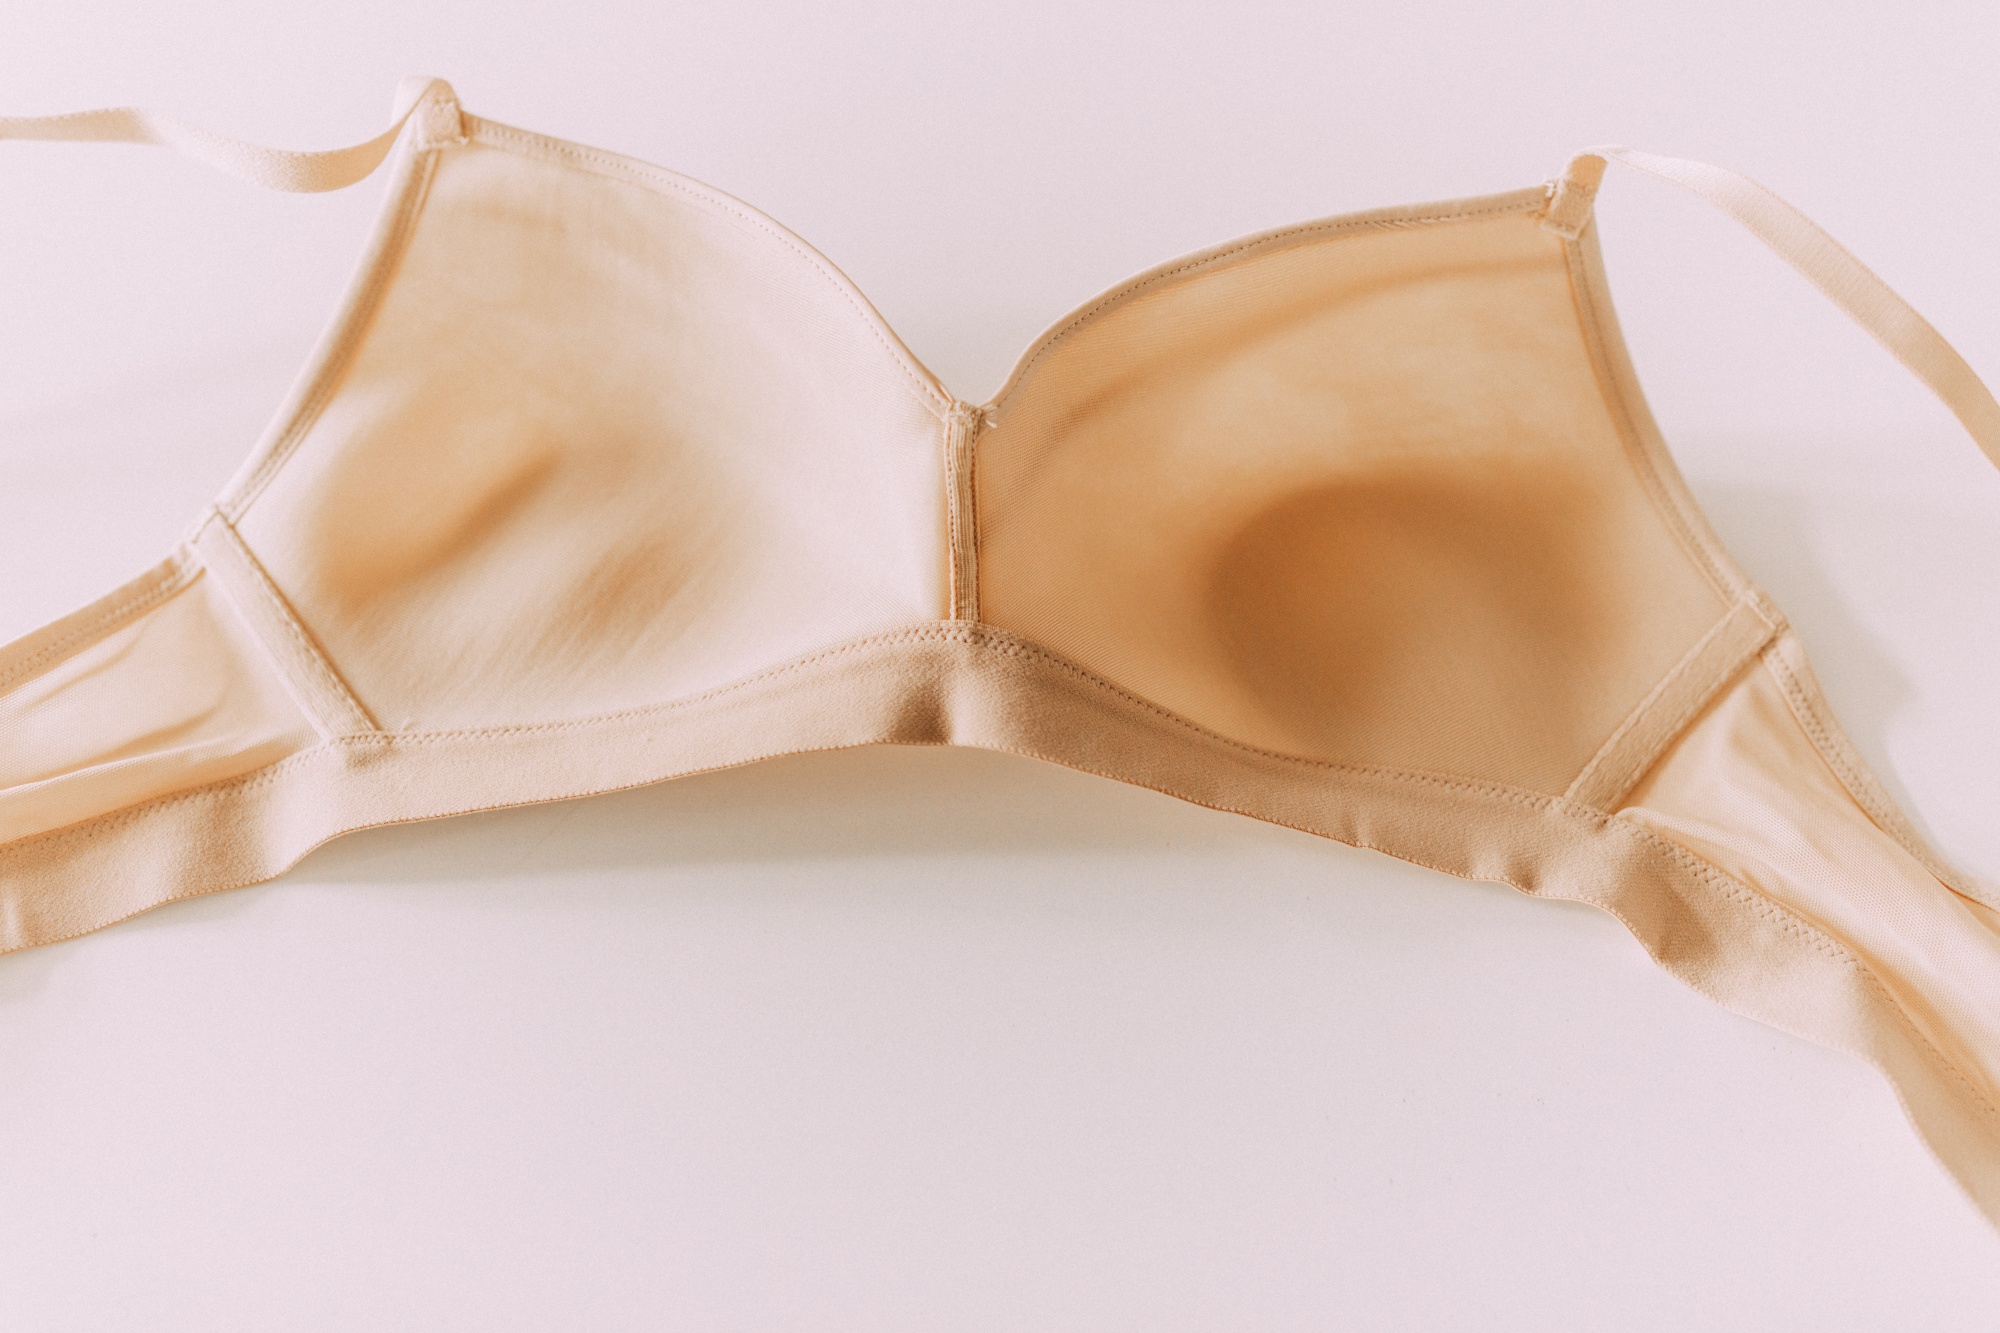 interior bra cups comfortable wireless lift nude strapless bra from soma intimates